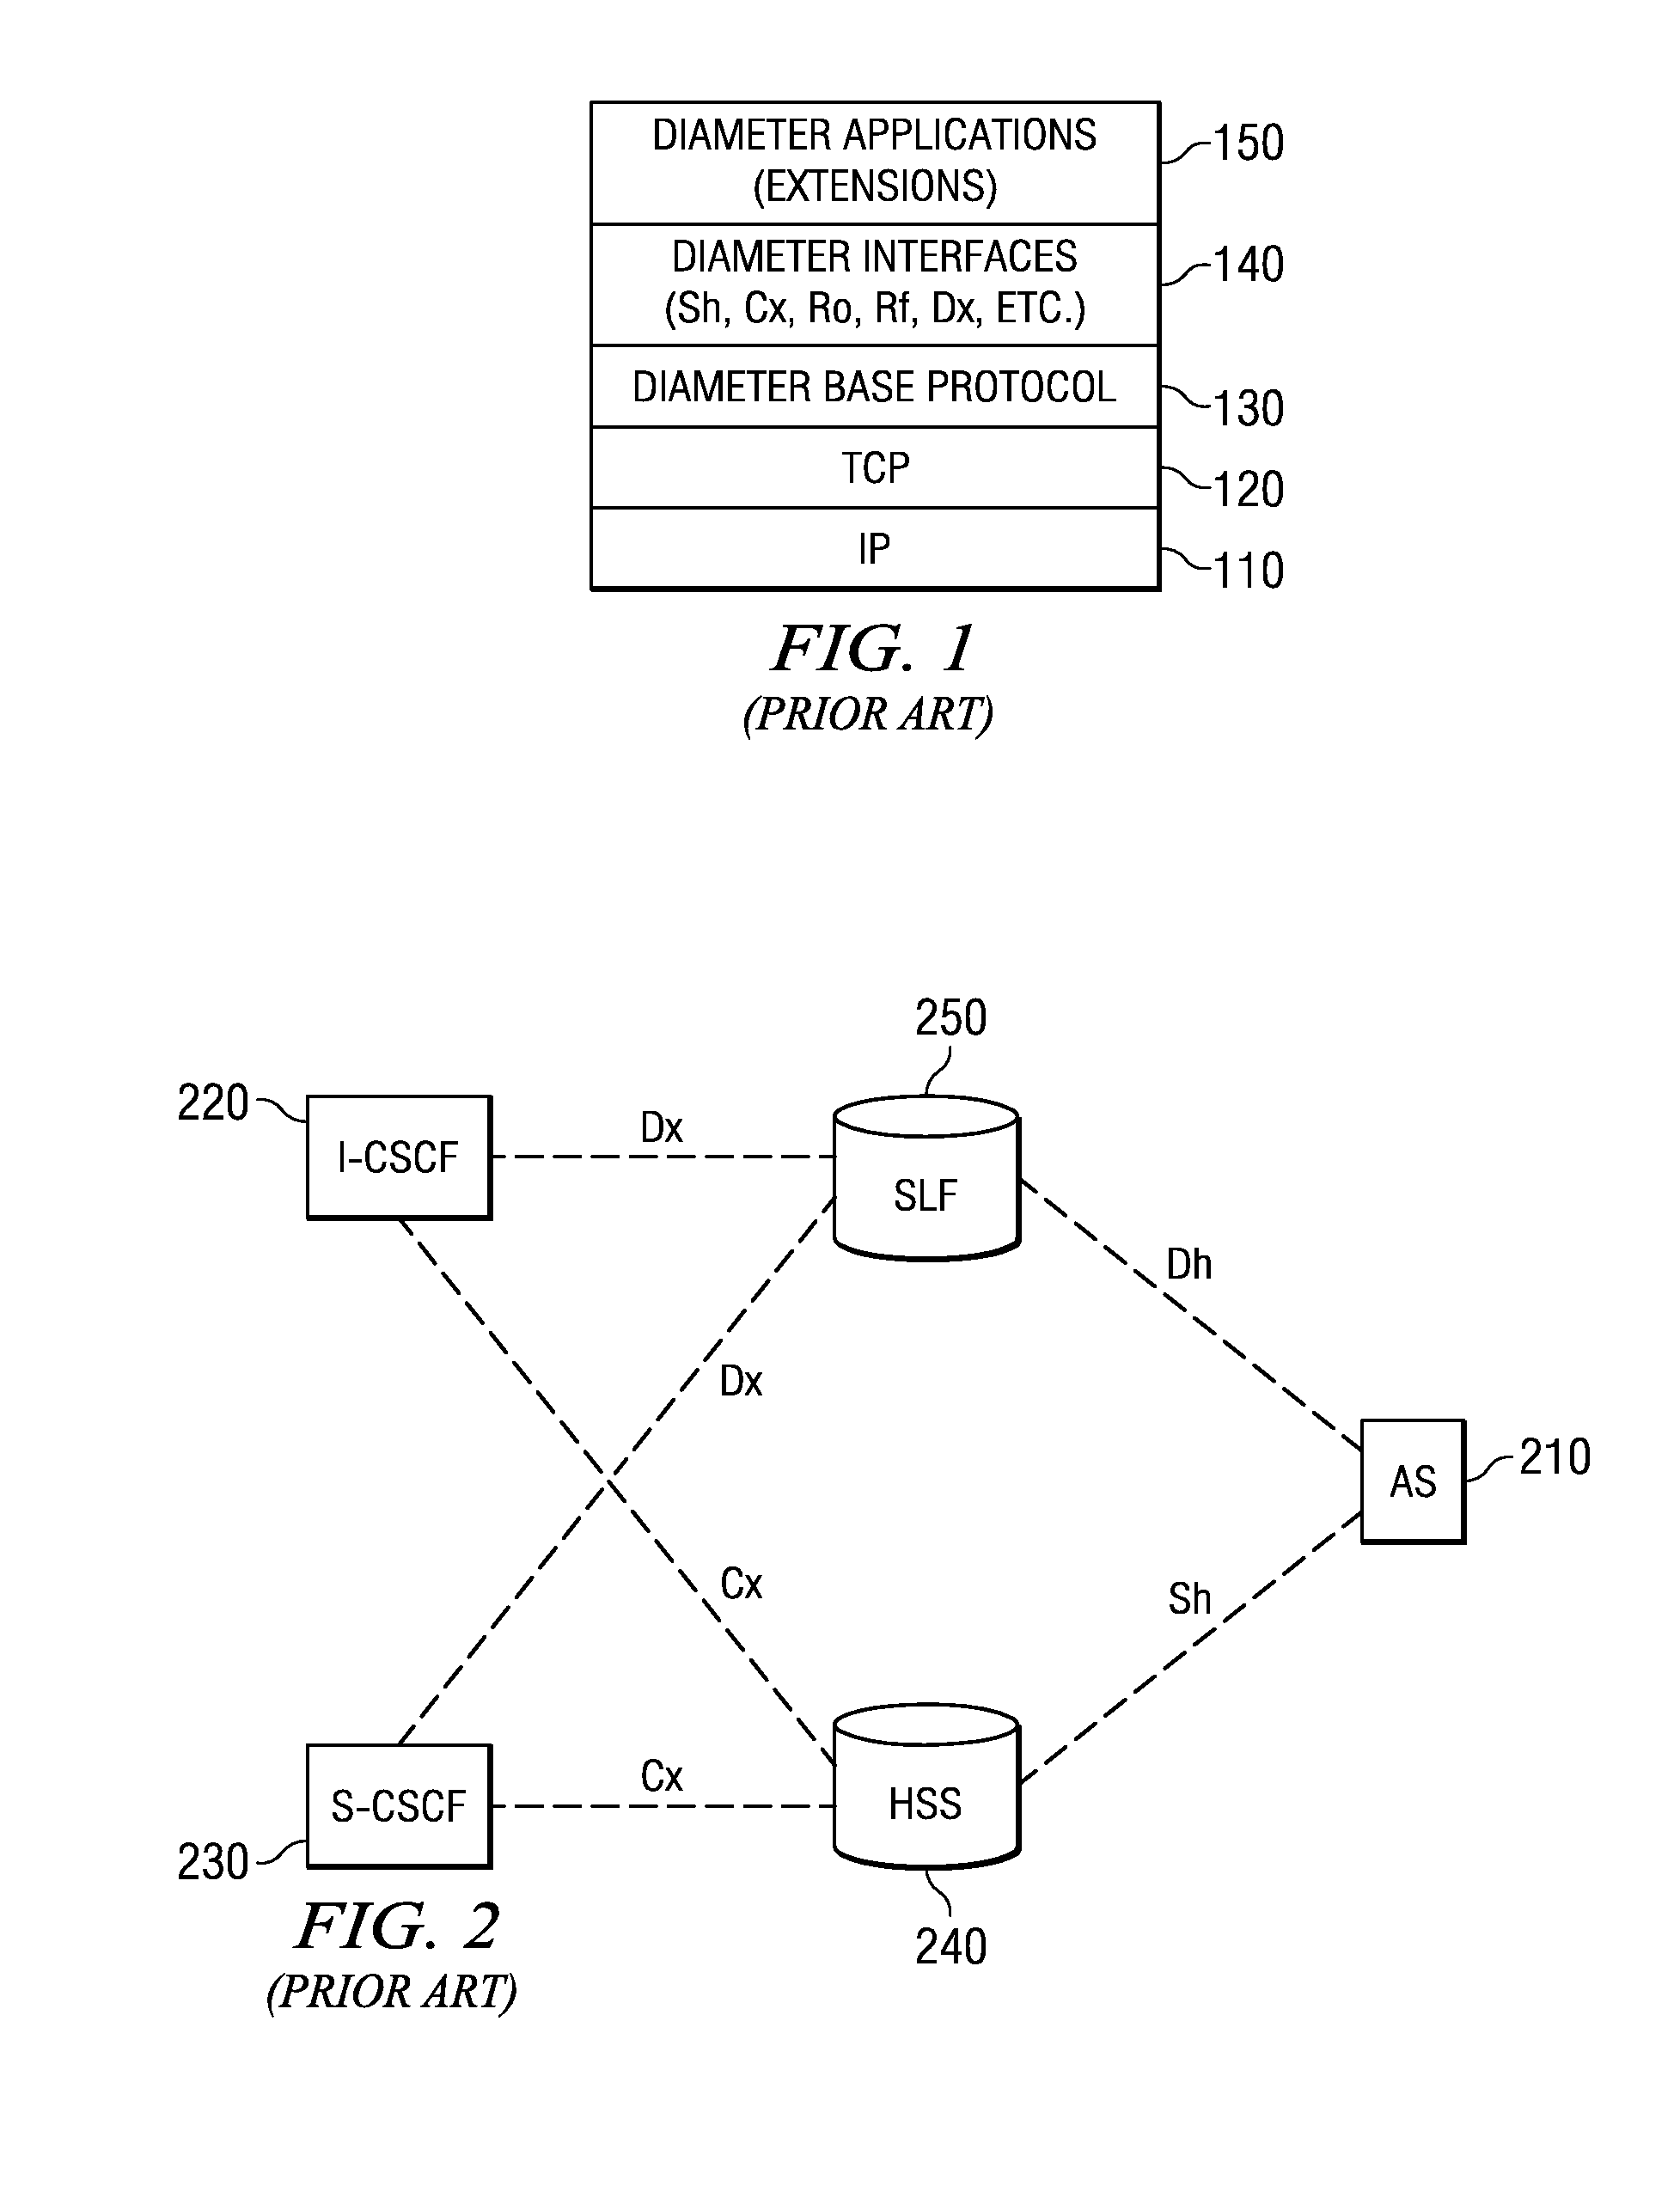 System and Method for Developing Diameter Applications